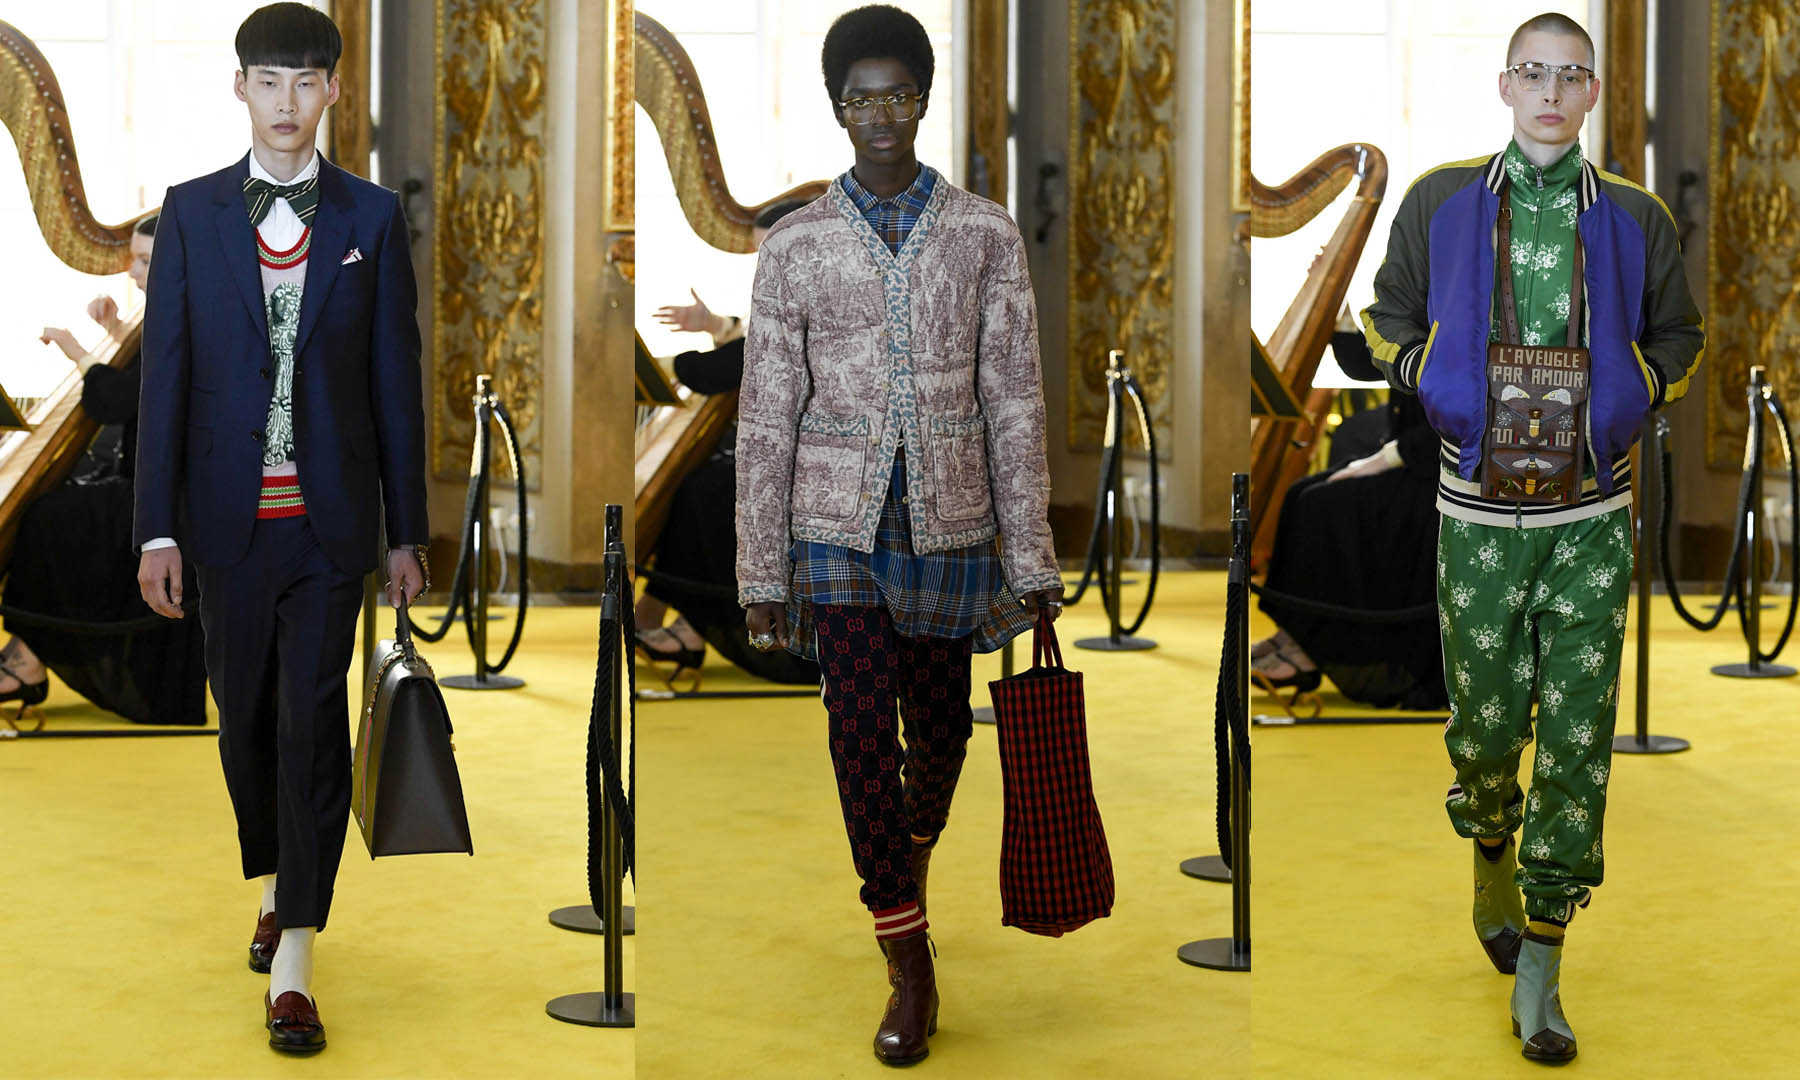 Gucci Cruise (Resort) 2018 Fashion Show at the Palatina Gallery in Florence’s Pitti Palace in Italy - Feature image for Sagaboi fashion show review.